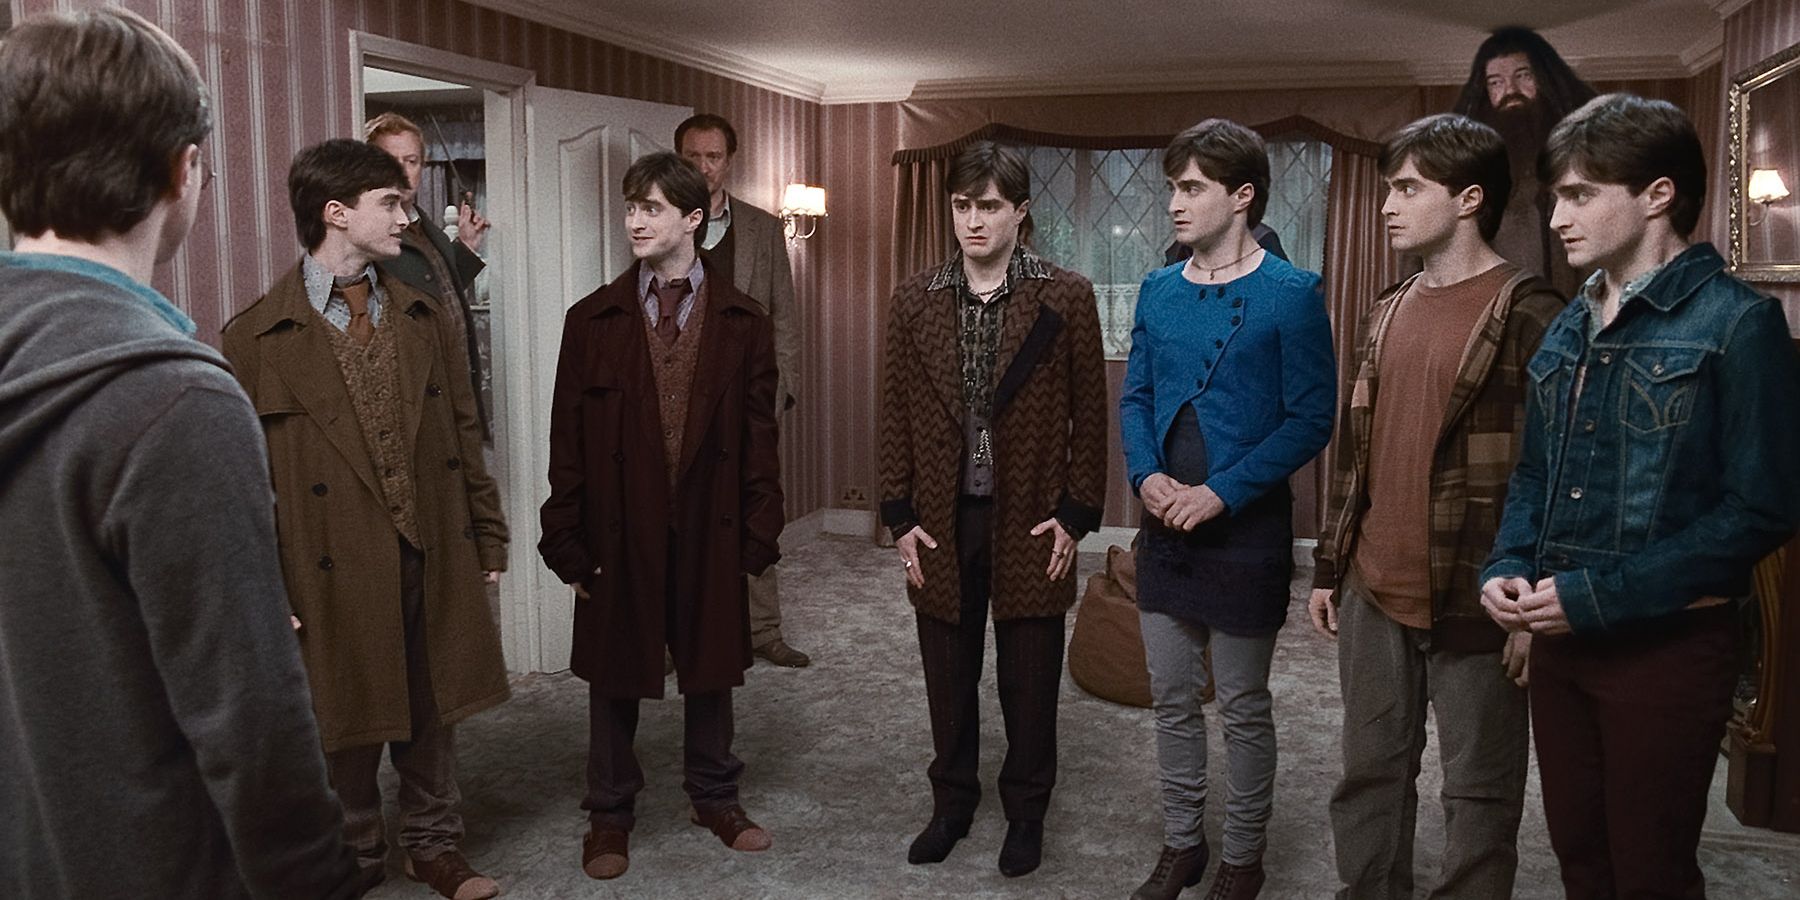 The seven Potters on Privet Drive in “Harry Potter and the Deathly Hallows”